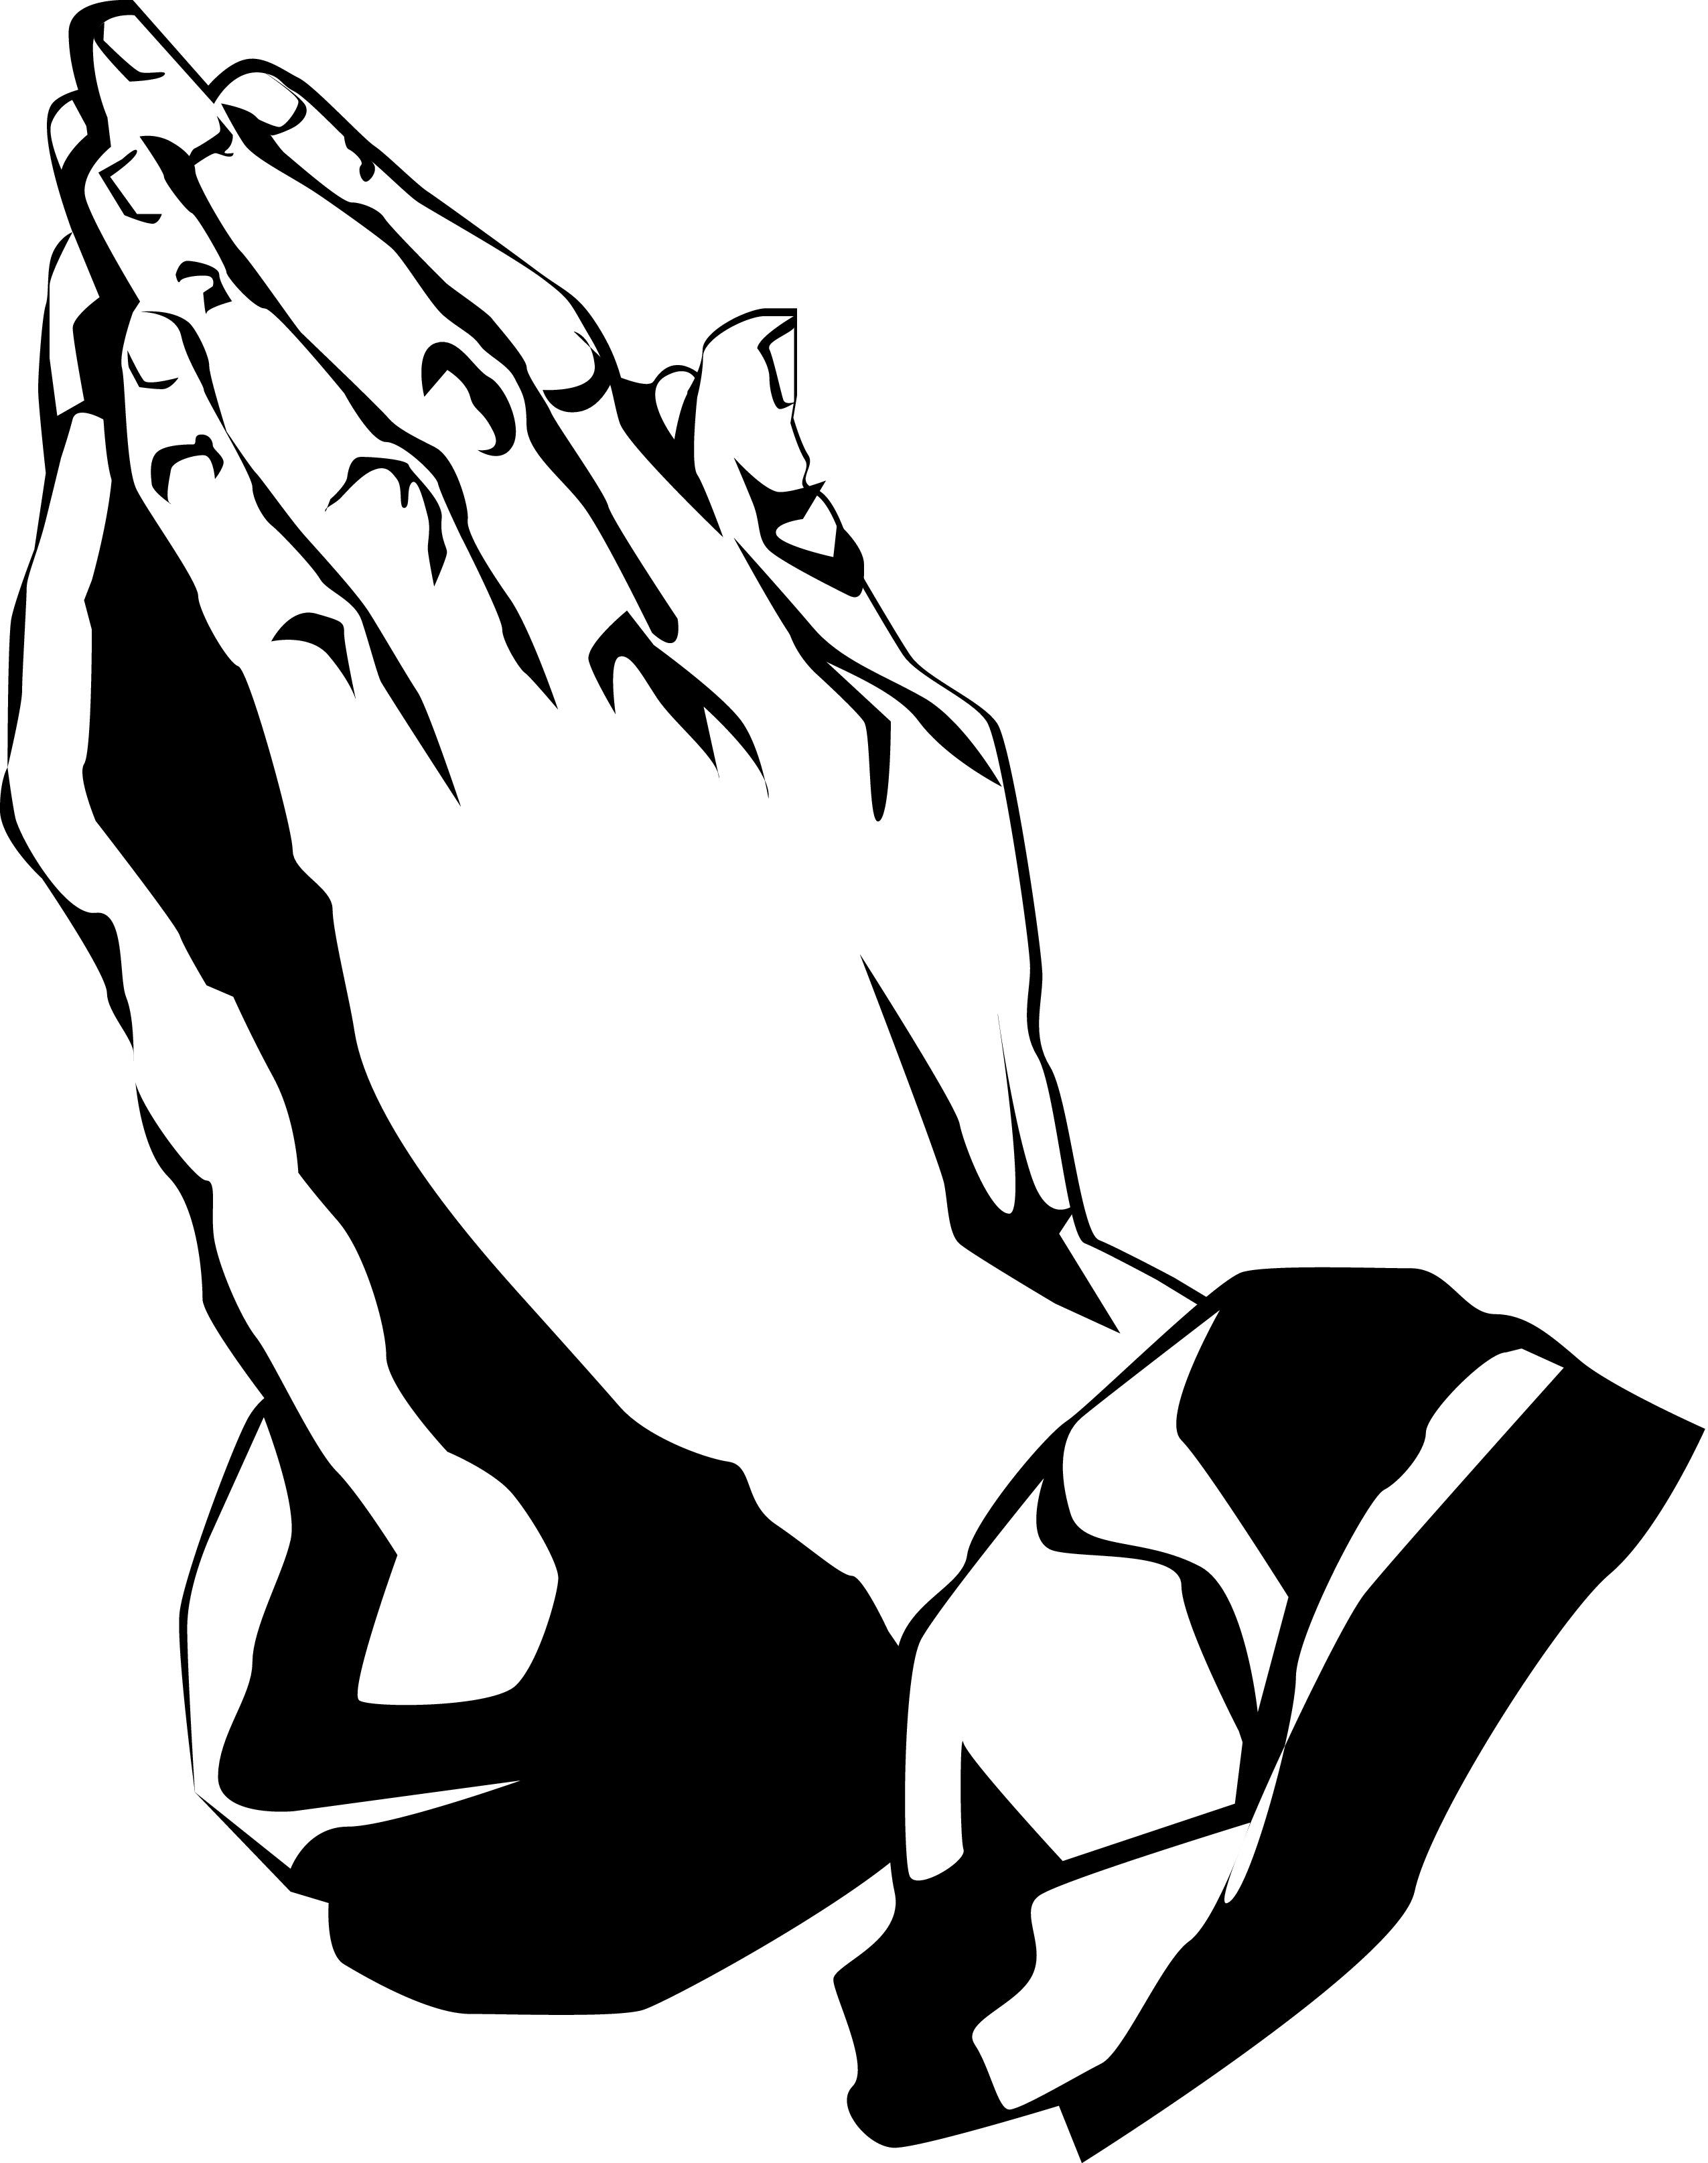 Prayer clipart free images 3